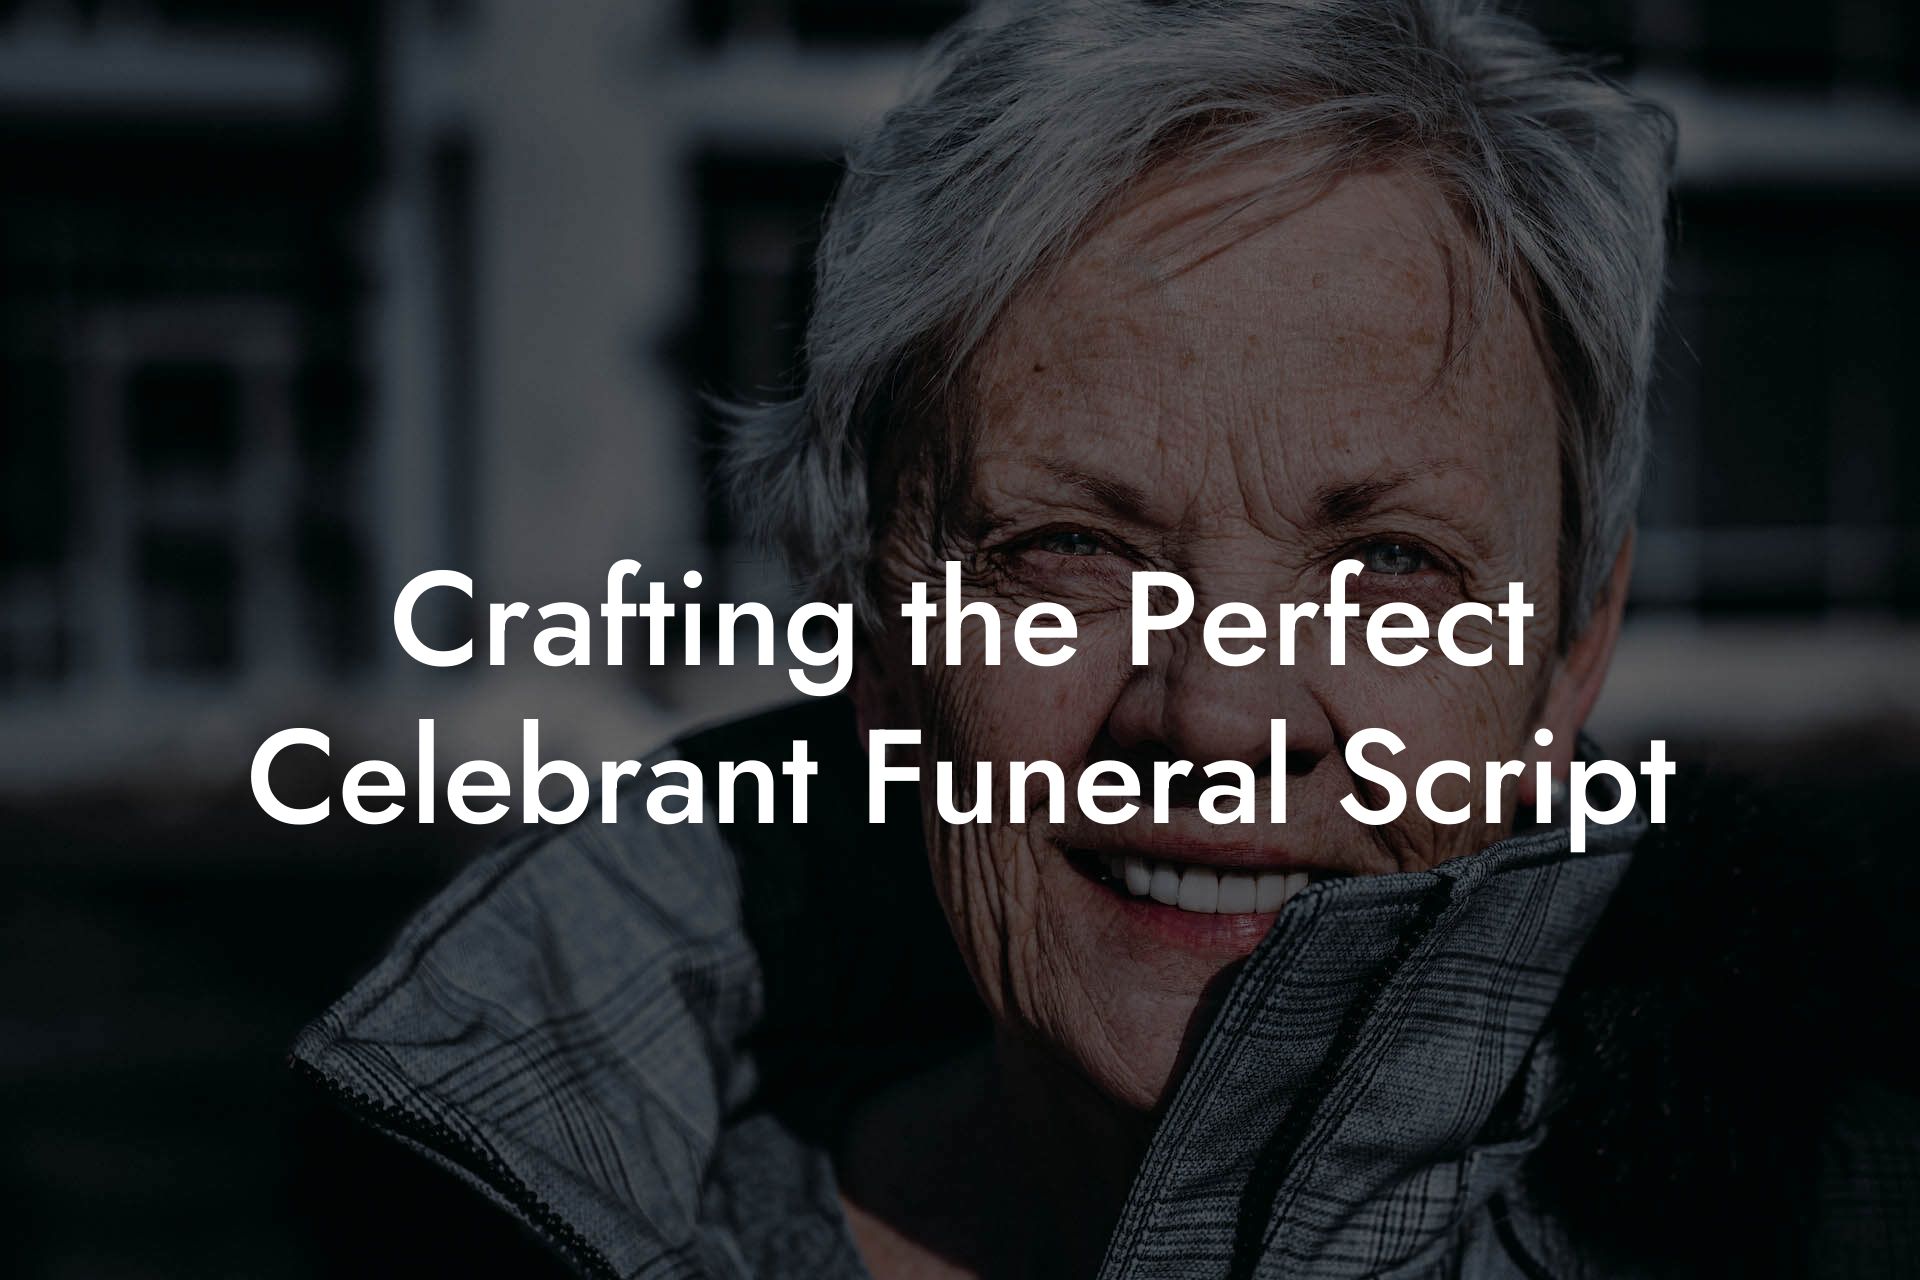 Crafting the Perfect Celebrant Funeral Script